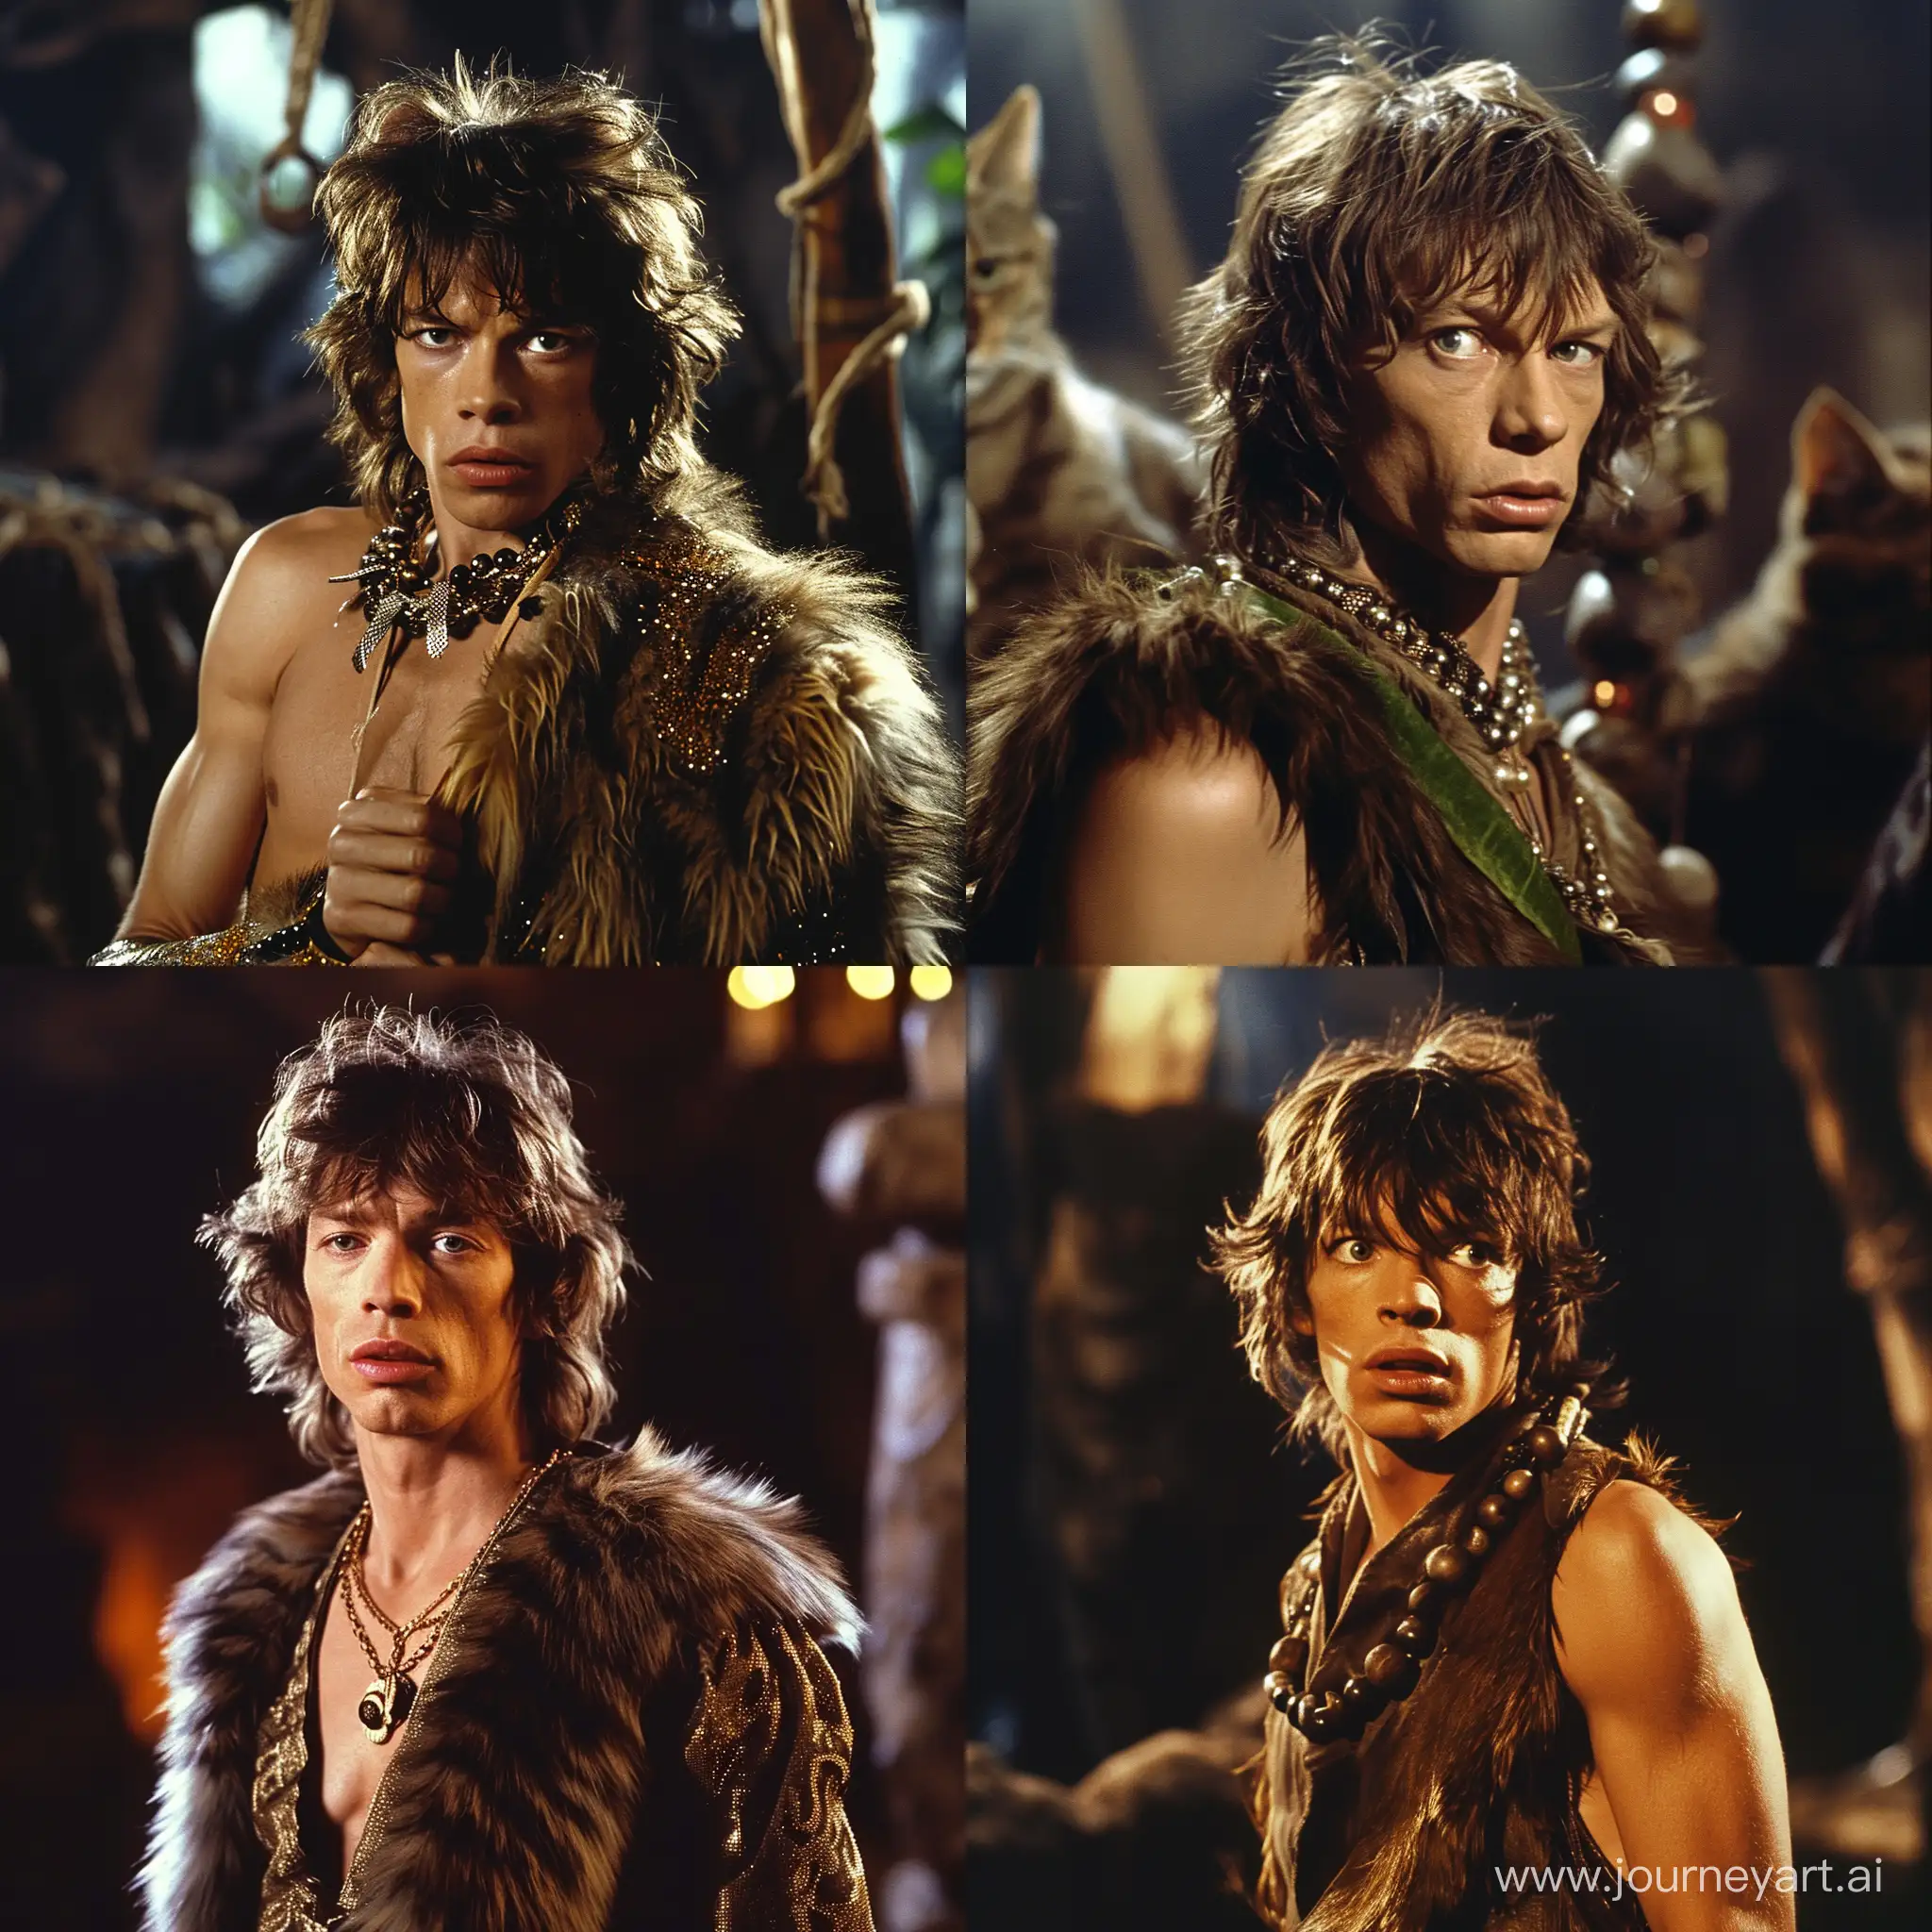 Mick Jagger in an 80s fantasy movie, cat-like features.
